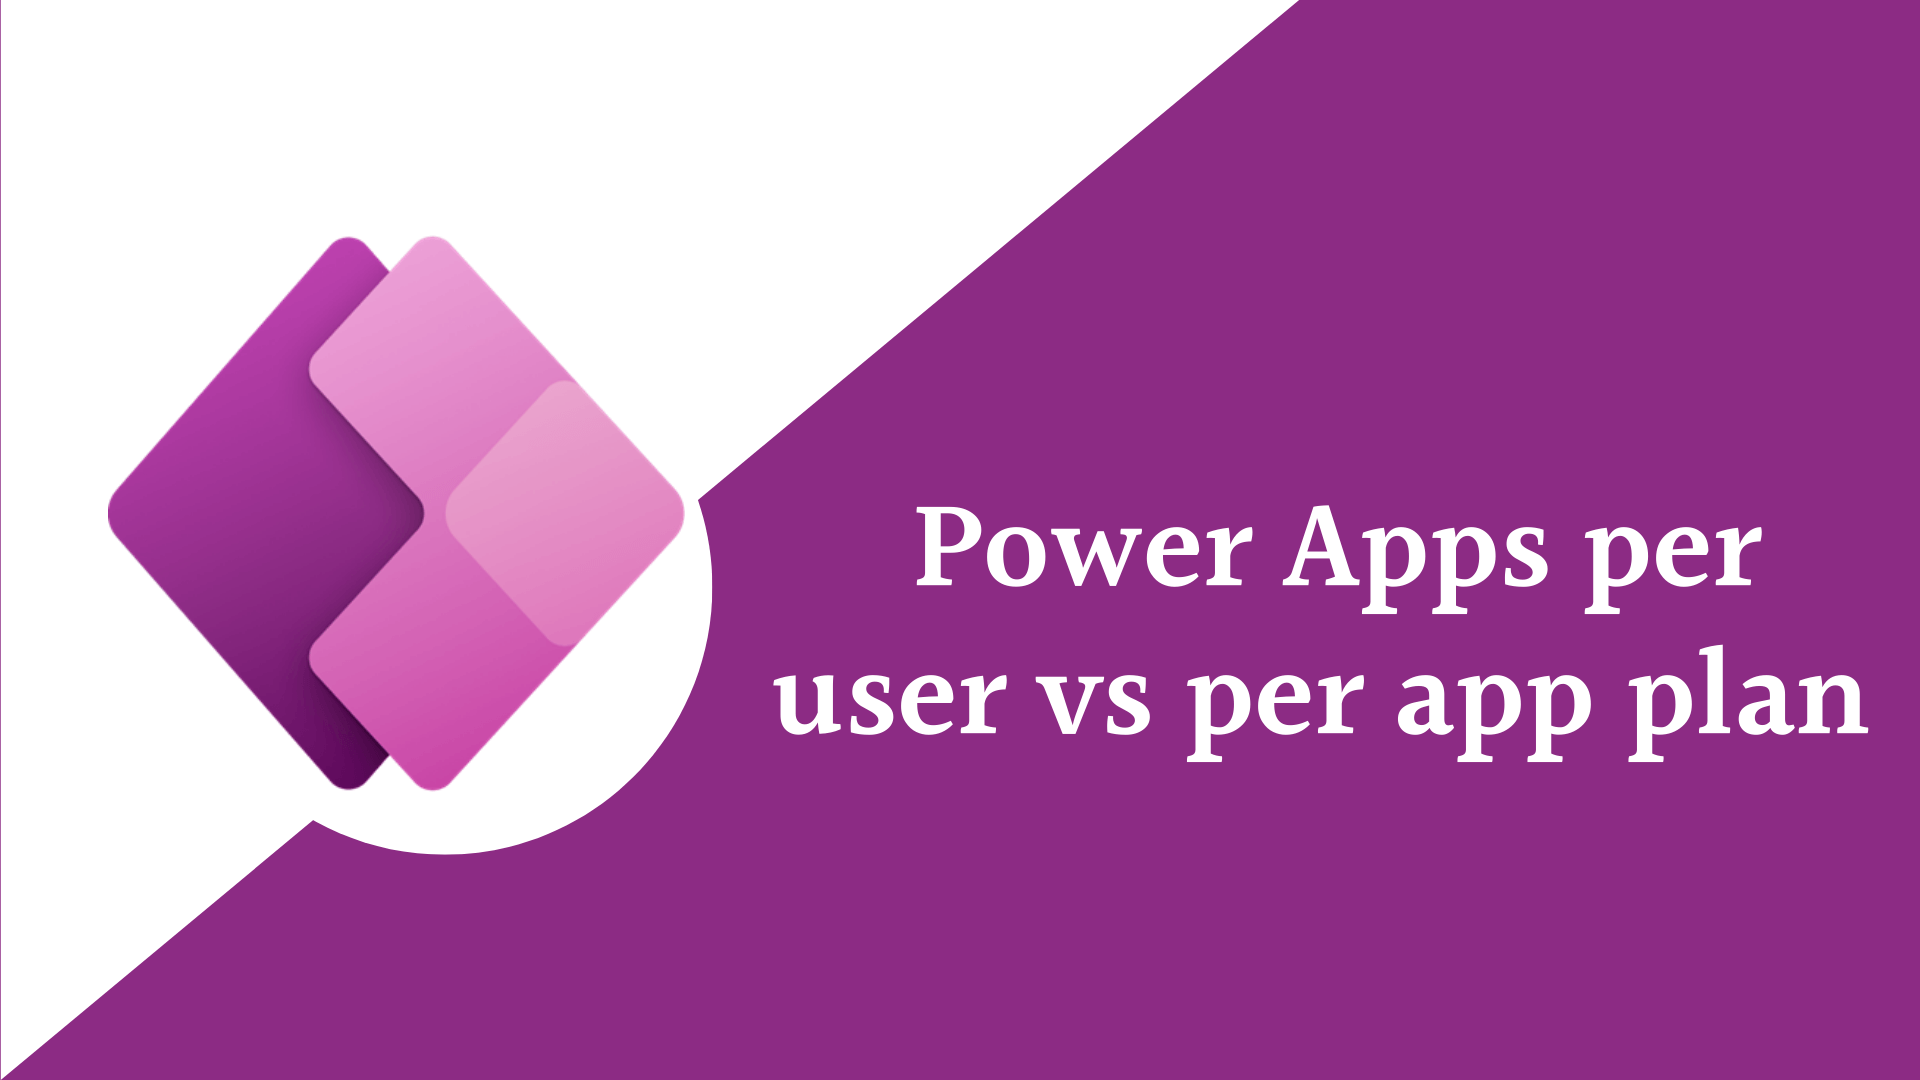 You are currently viewing PowerApps per app plan vs per user plan